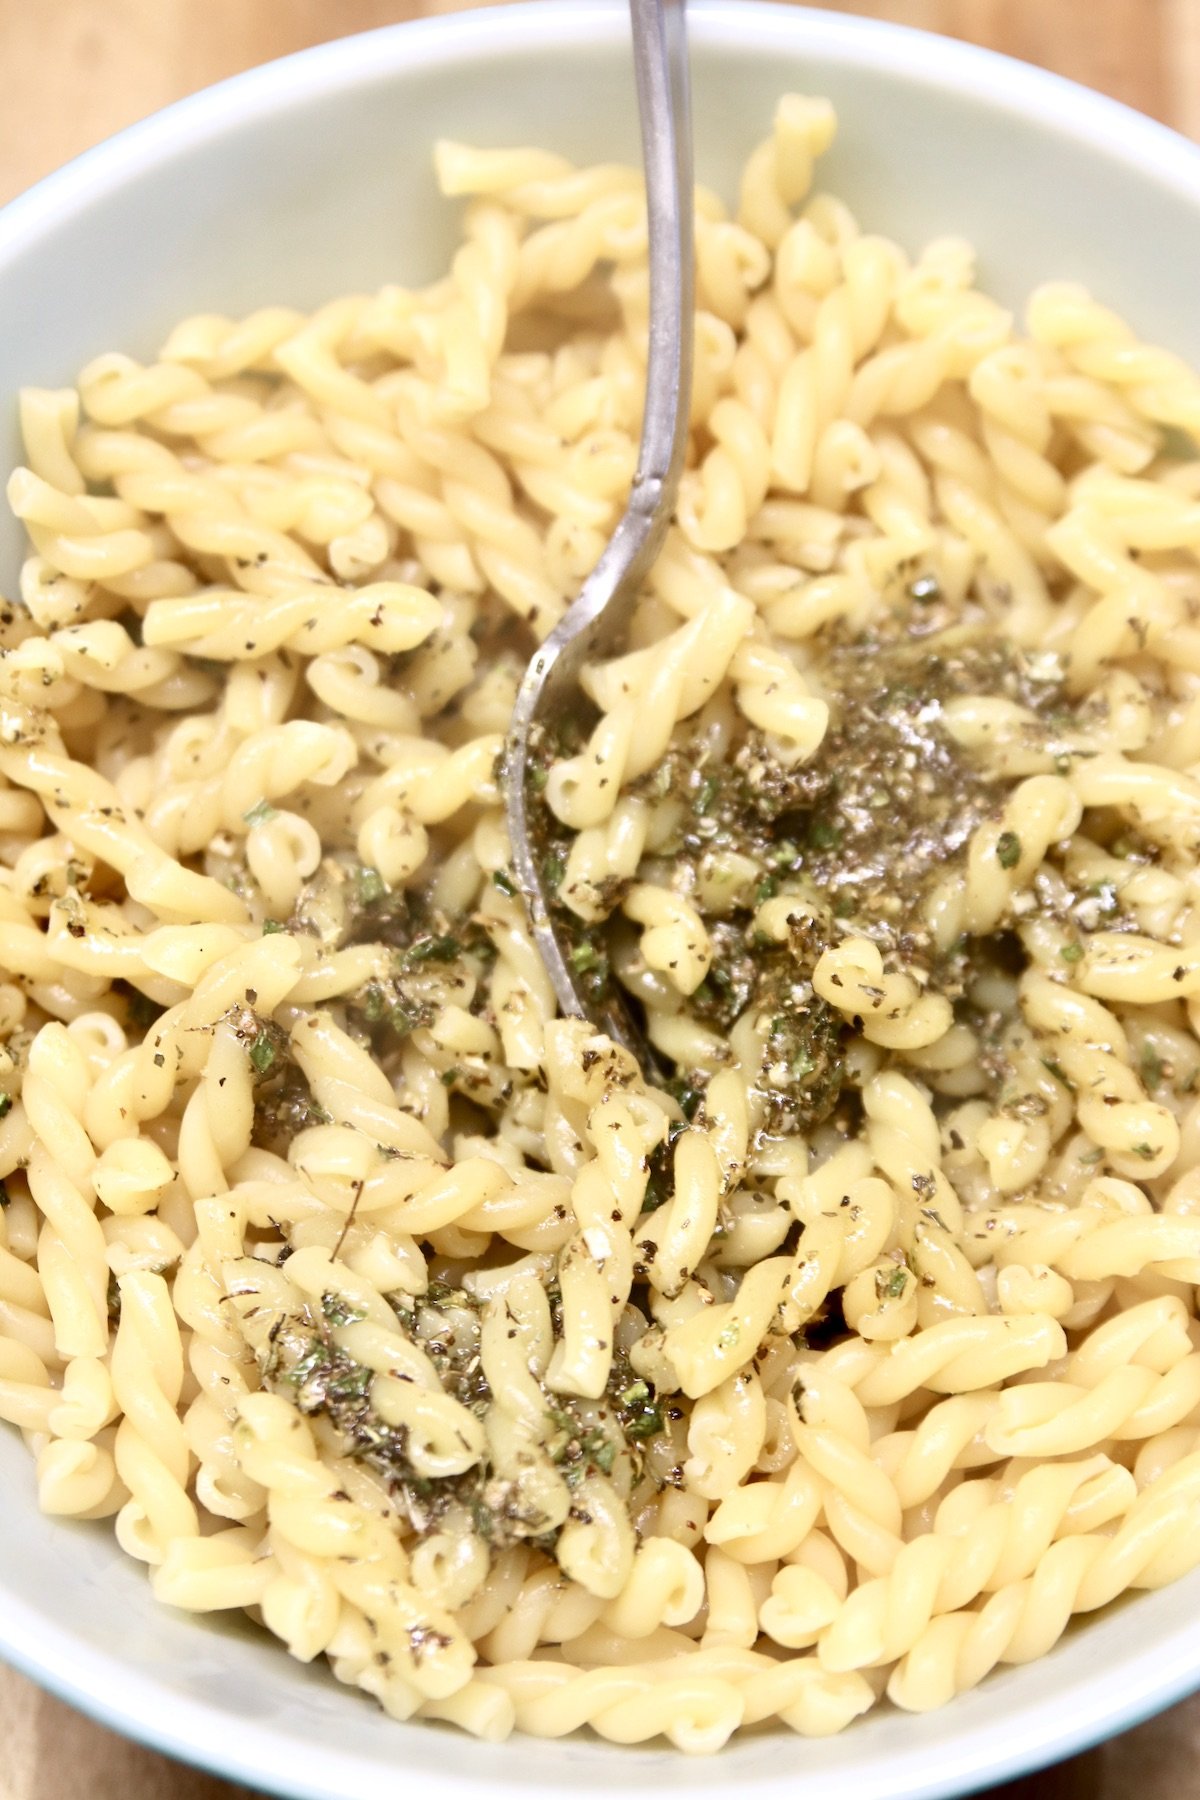 bowl of pasta with herb dressing poured over the top